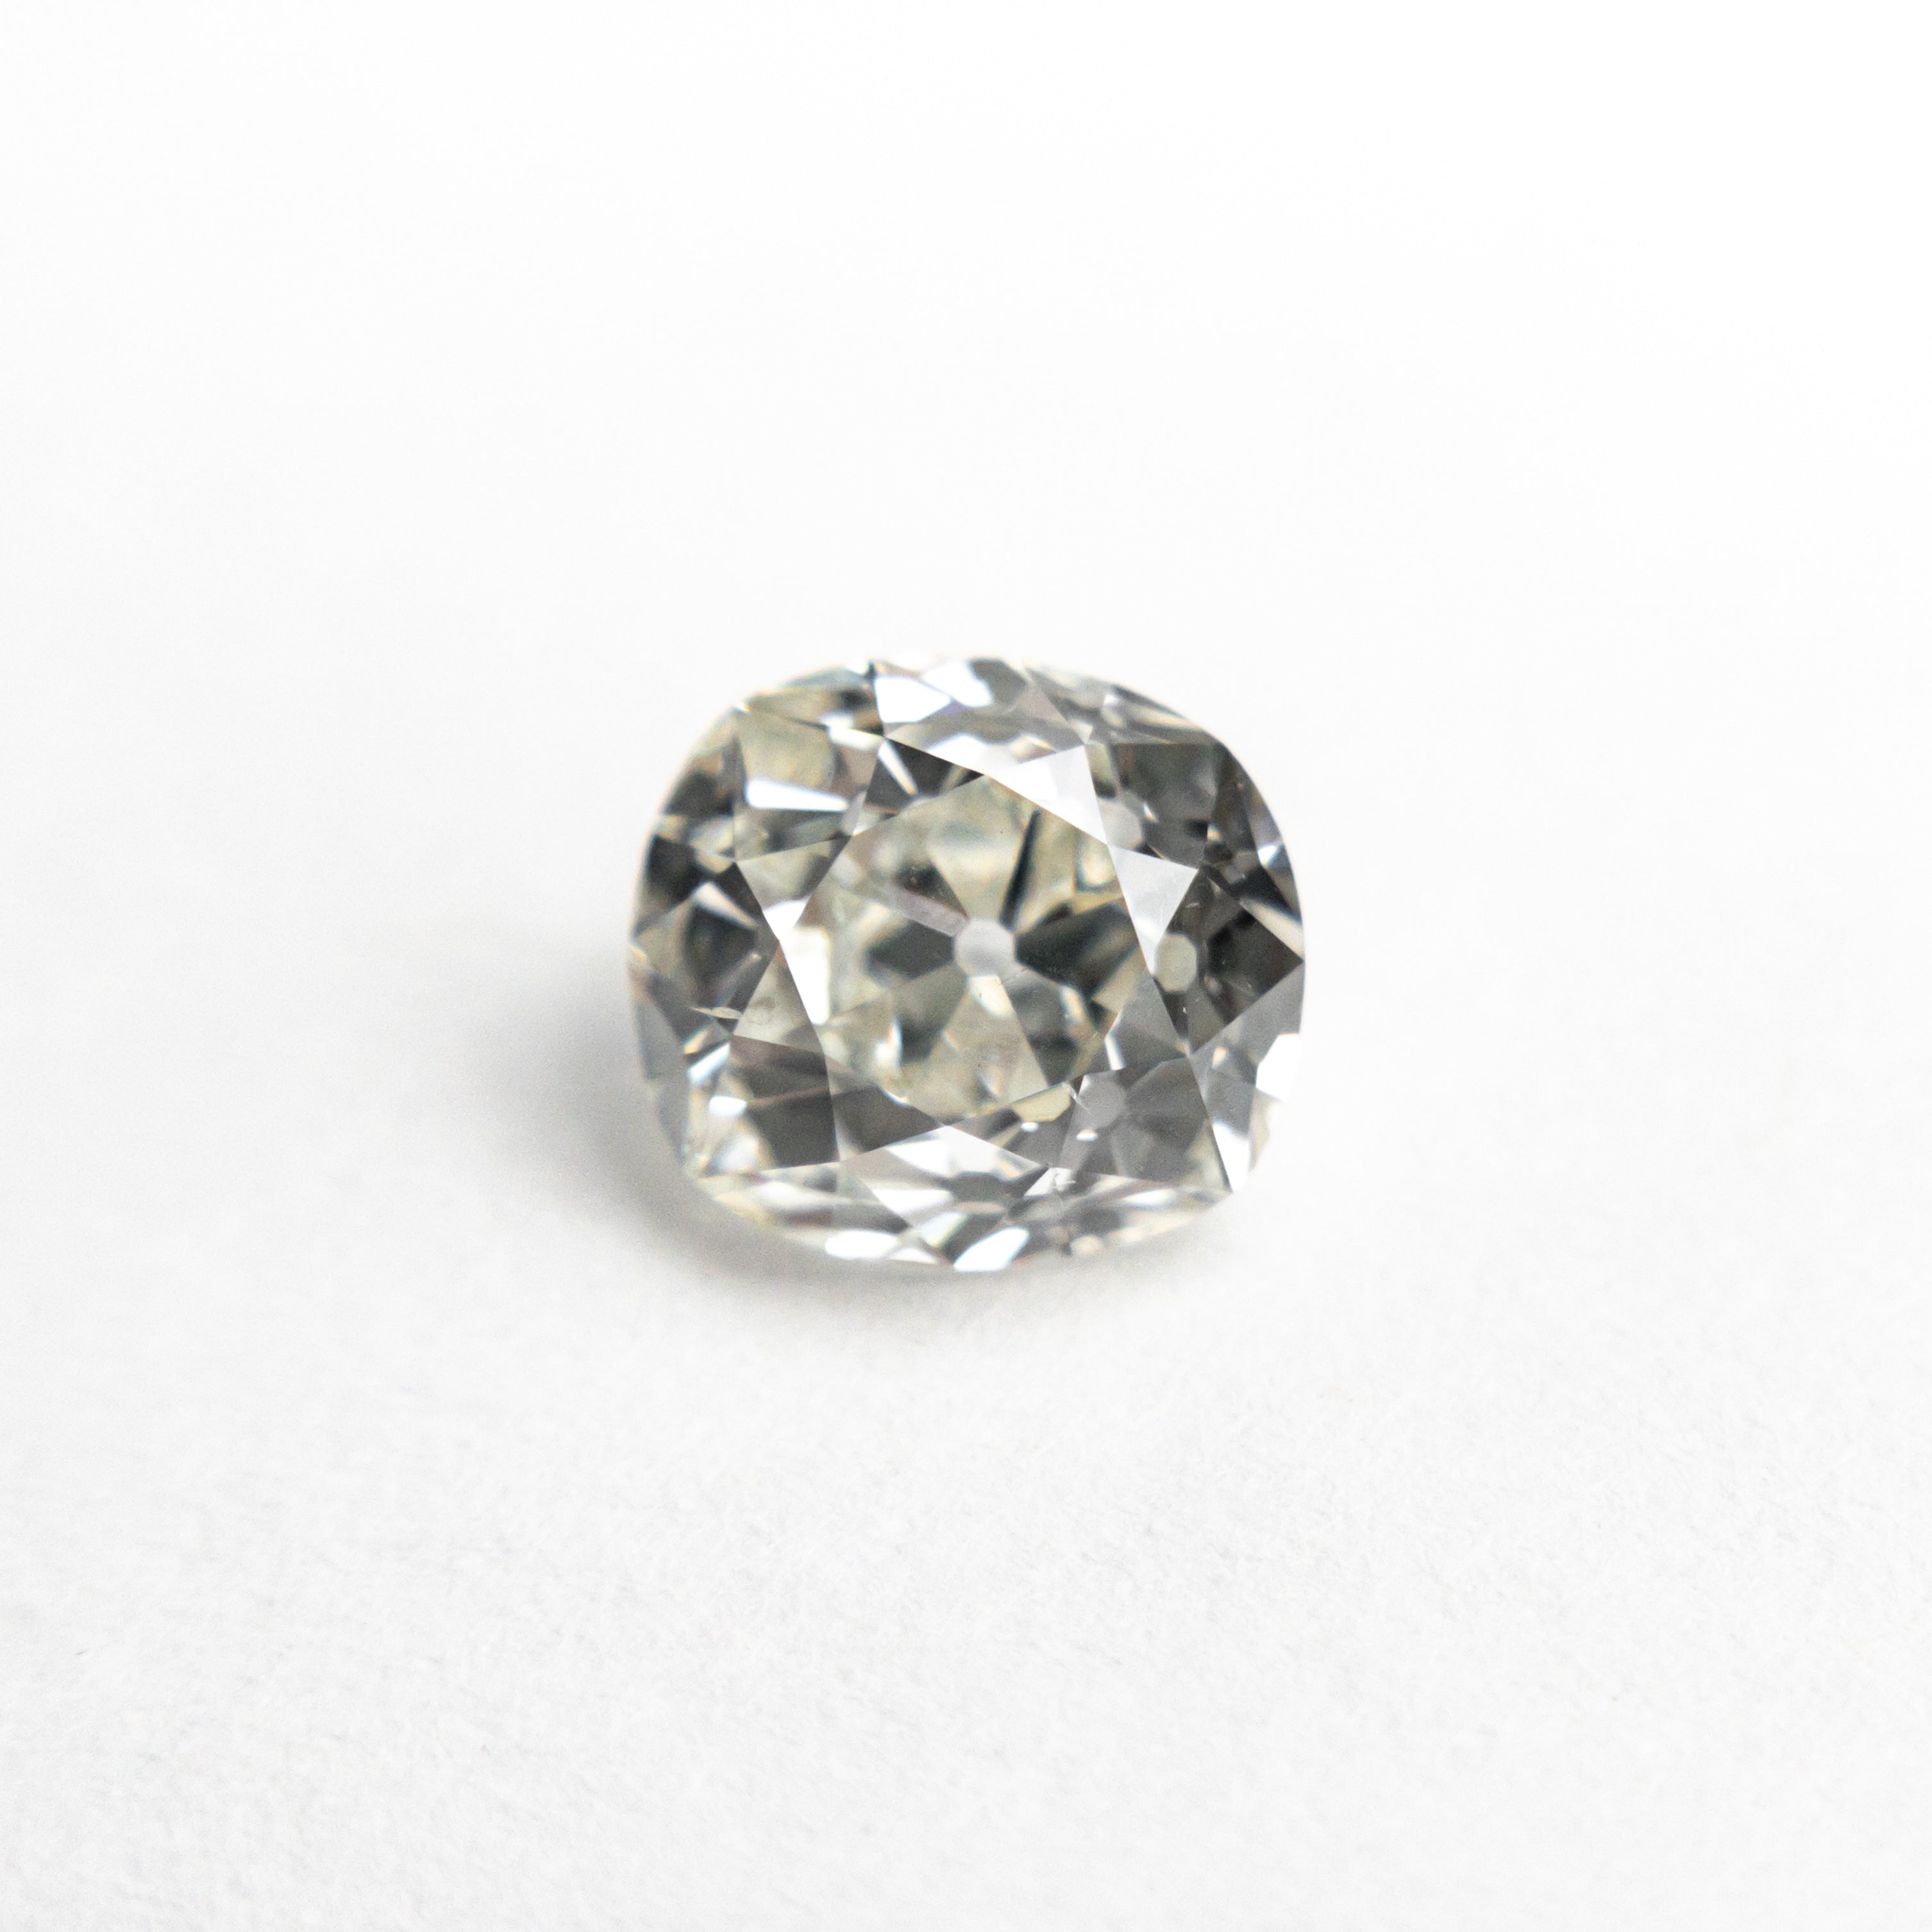 1.19ct 6.54x5.93x4.16mm GIA SI1 K Antique Old Mine Cut 22072-01